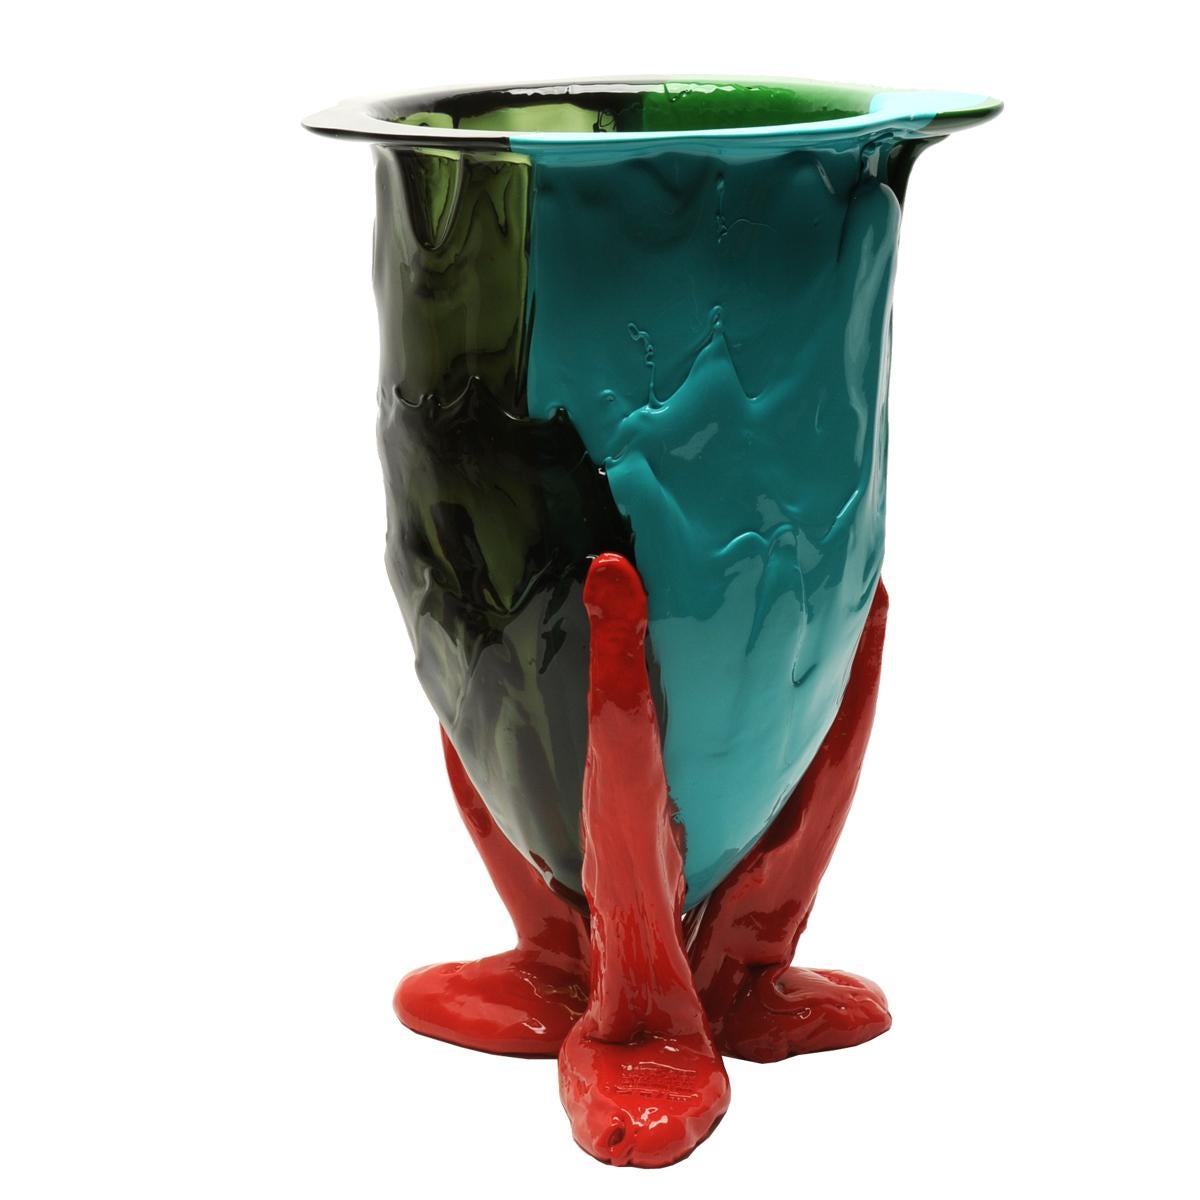 Amazonia vase - clear green, matt green, turquoise, coral red
Vase in soft resin designed by Gaetano Pesce in 1995 for Fish Design collection.

Measures: XL - ø 30cm x H 56cm
Other sizes available.
Colours: clear green, matt green, turquoise,